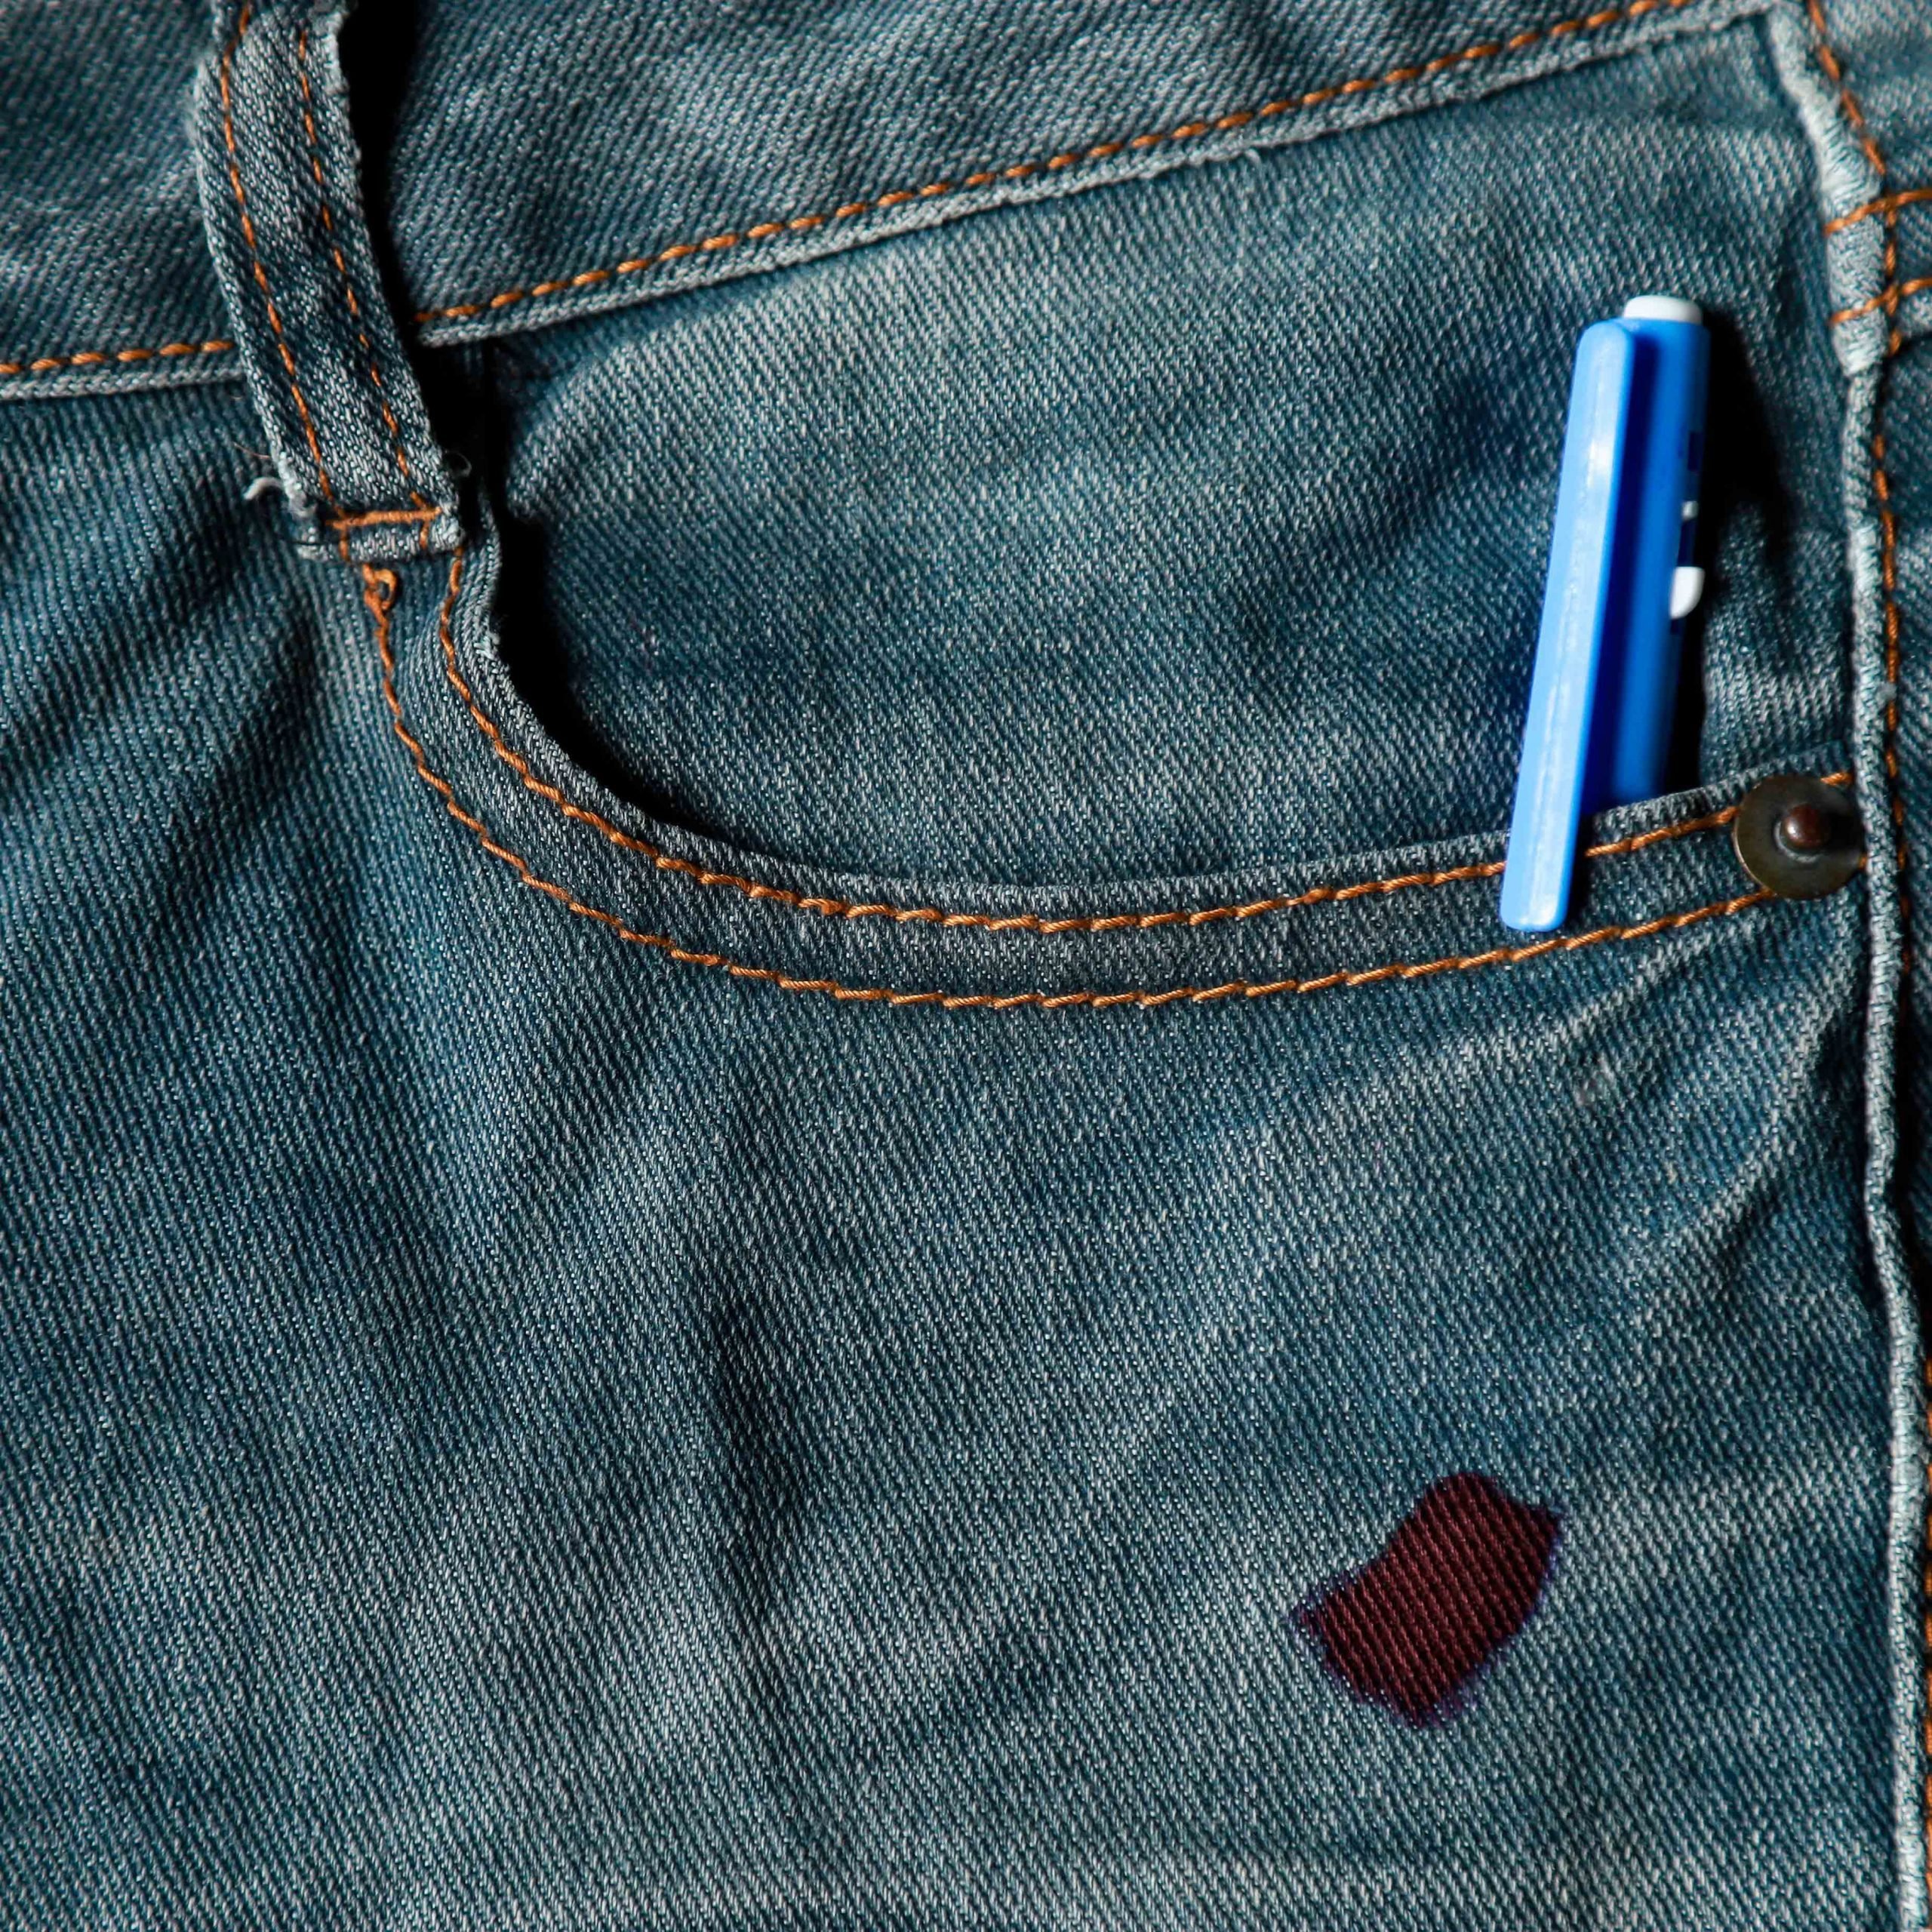 How to remove ball pen marks from my jeans - Quora